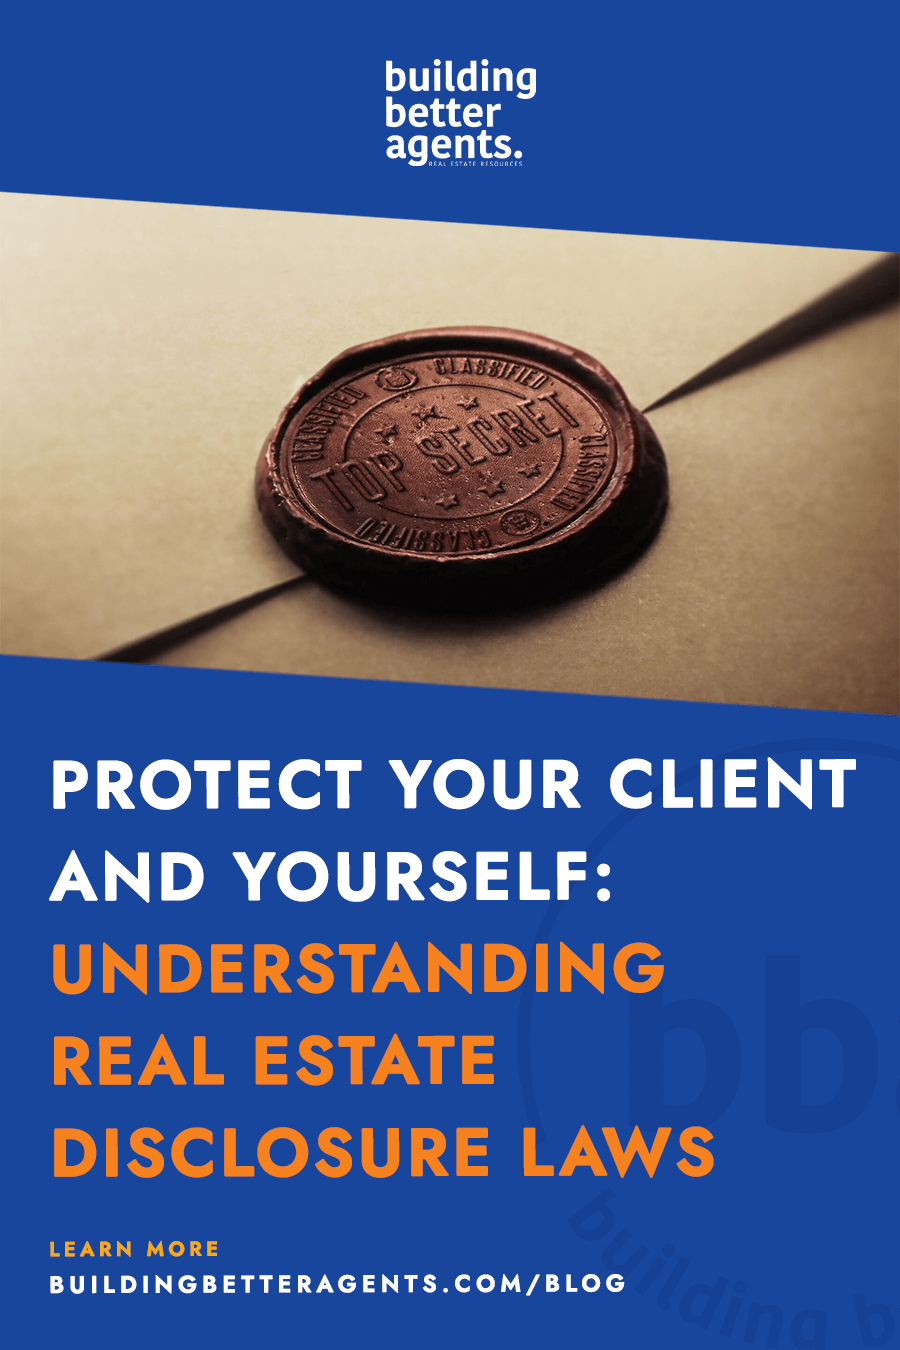 Protect Your Client And Yourself: Understand Real Estate Disclosure Laws